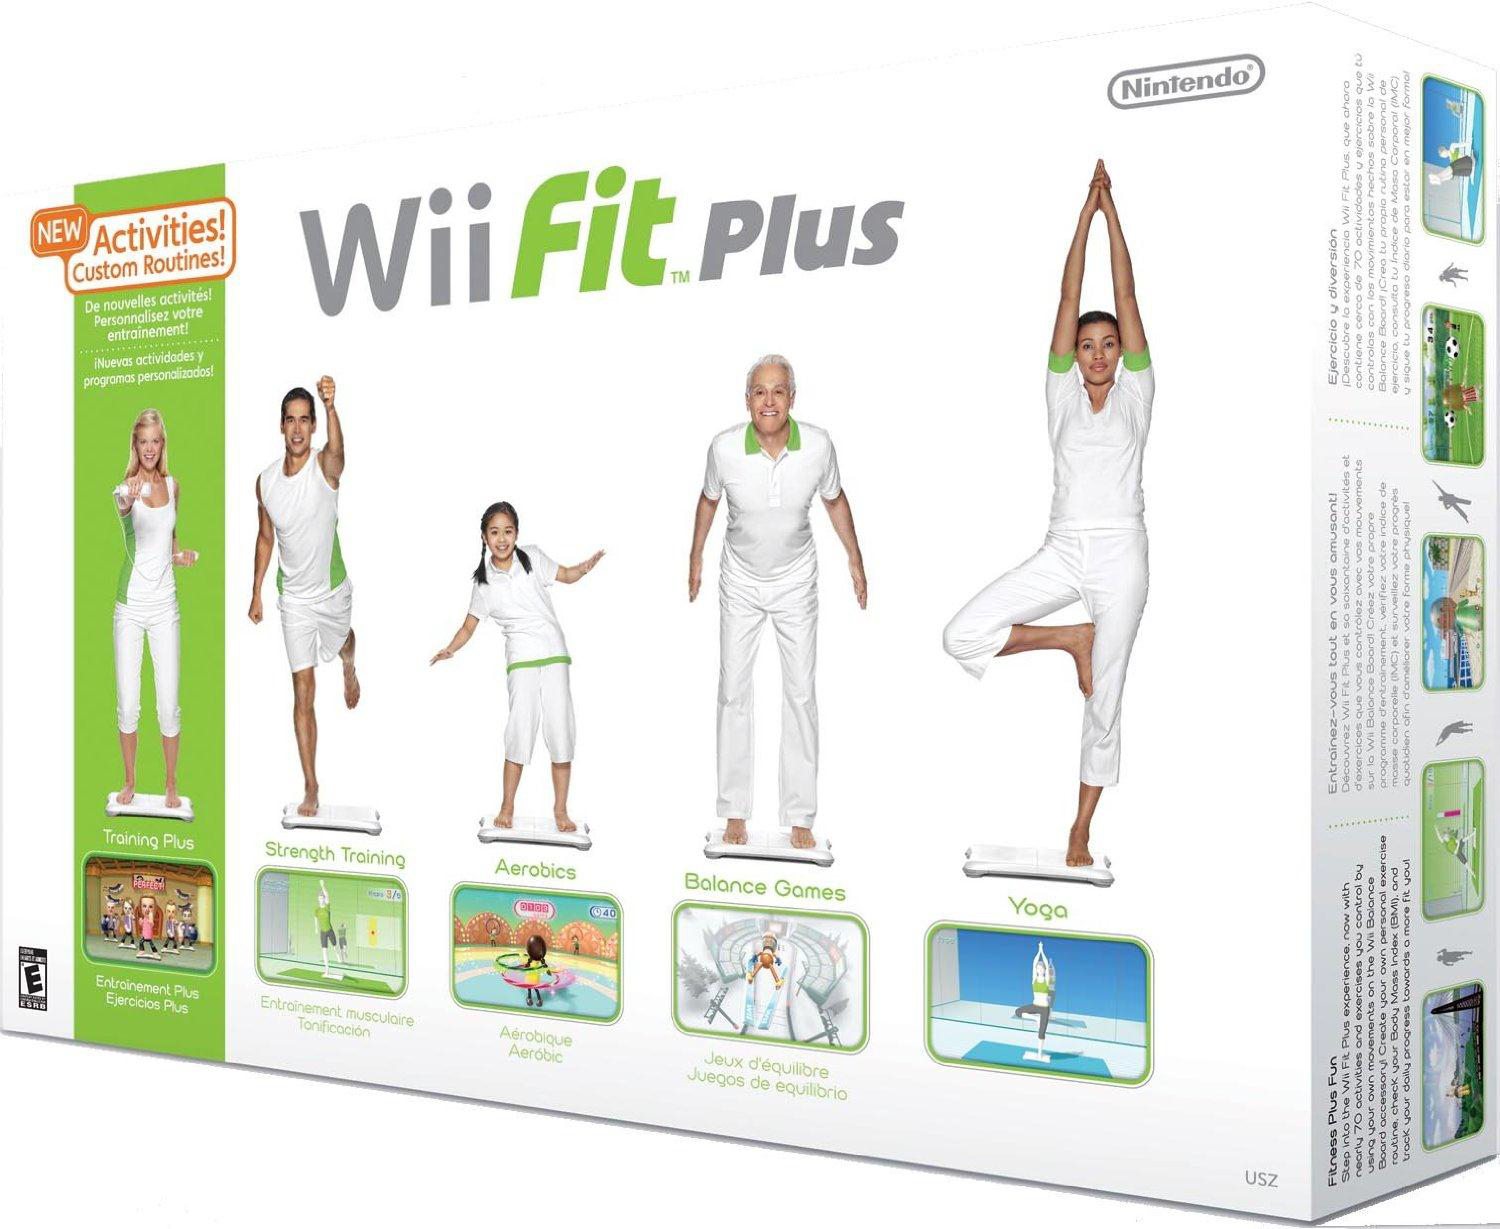 Figure 1. The Wii Fit Plus Packaging. Showing the use of the Wii Balance Board